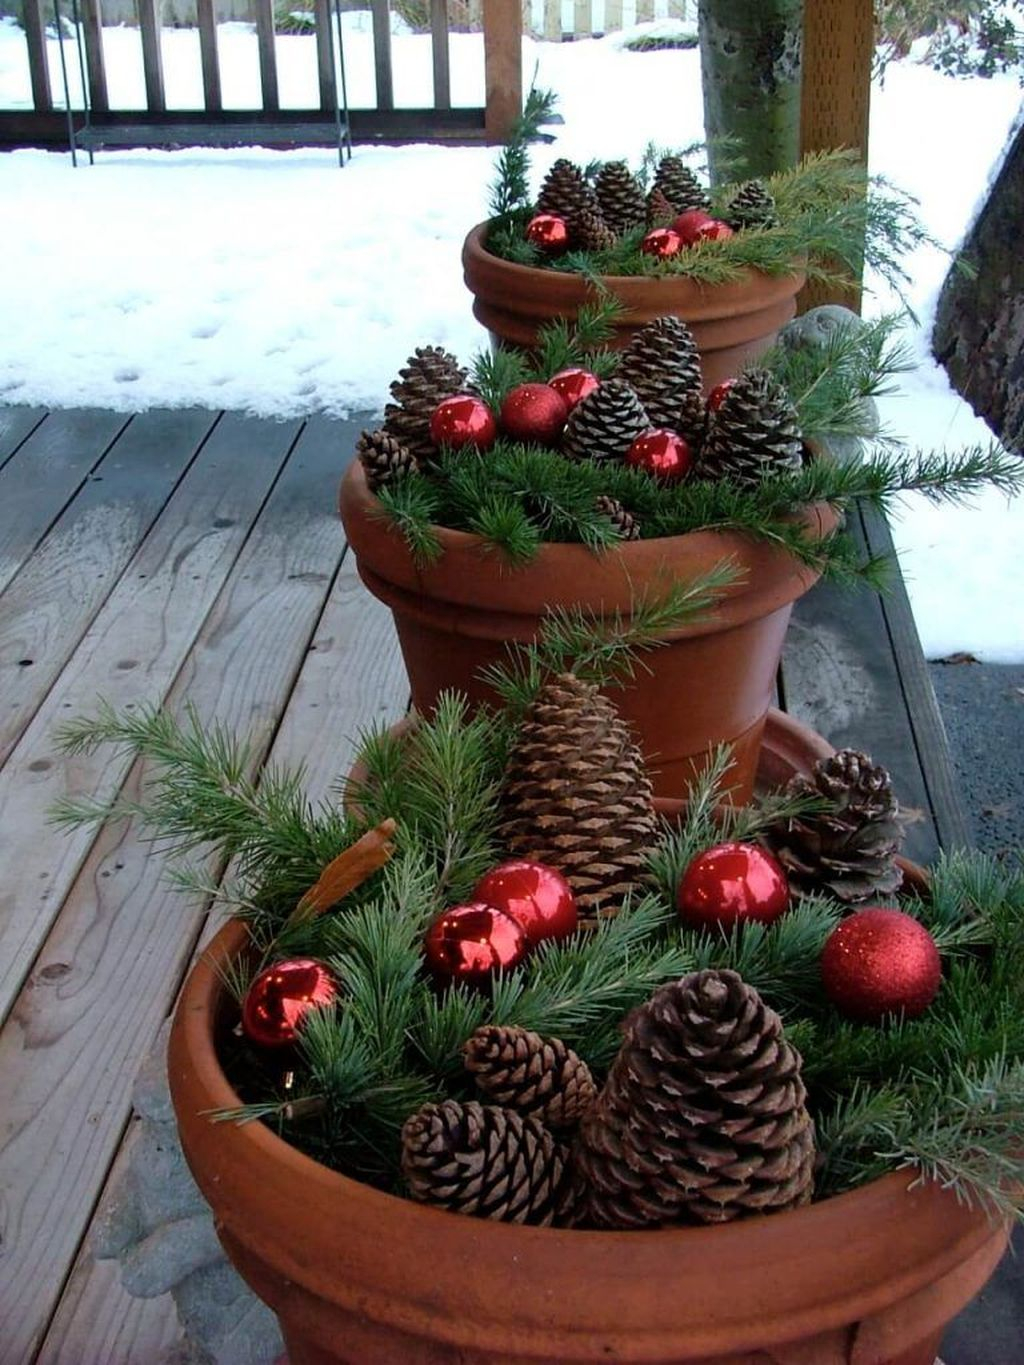 Marvelous Outdoor Holiday Planter Ideas To Beauty Porch Décor 19